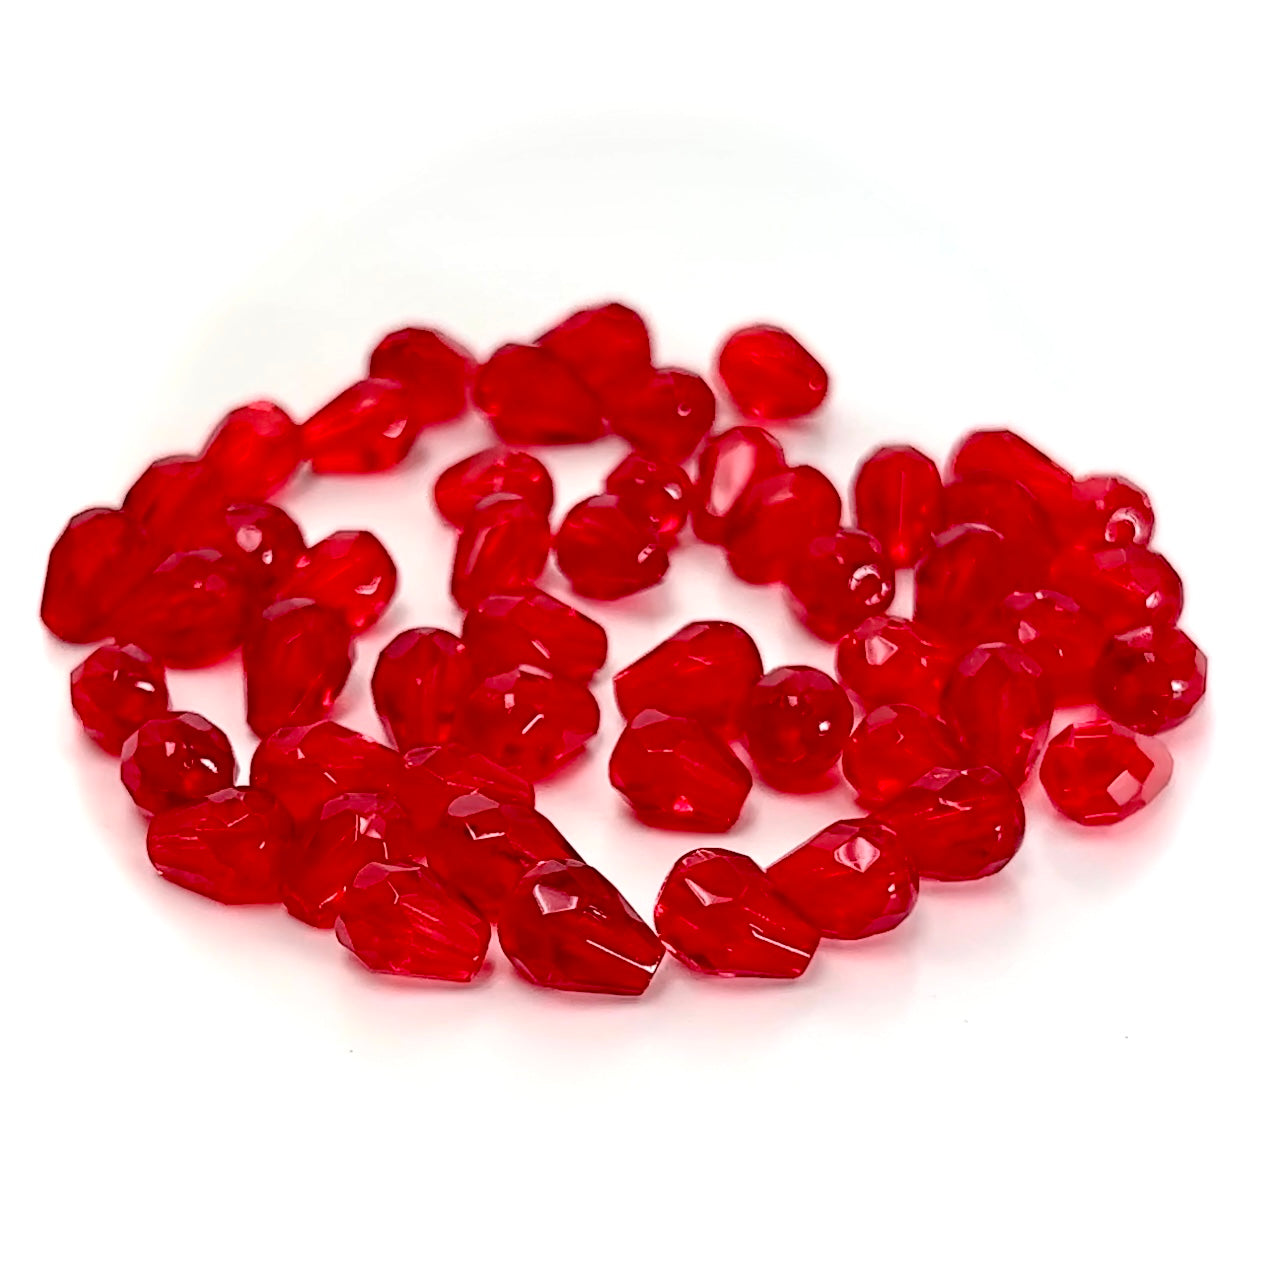 Czech Glass Pear Shaped Fire Polished Beads 9x7mm Light Siam red Tear Drops, 50 pieces, J037